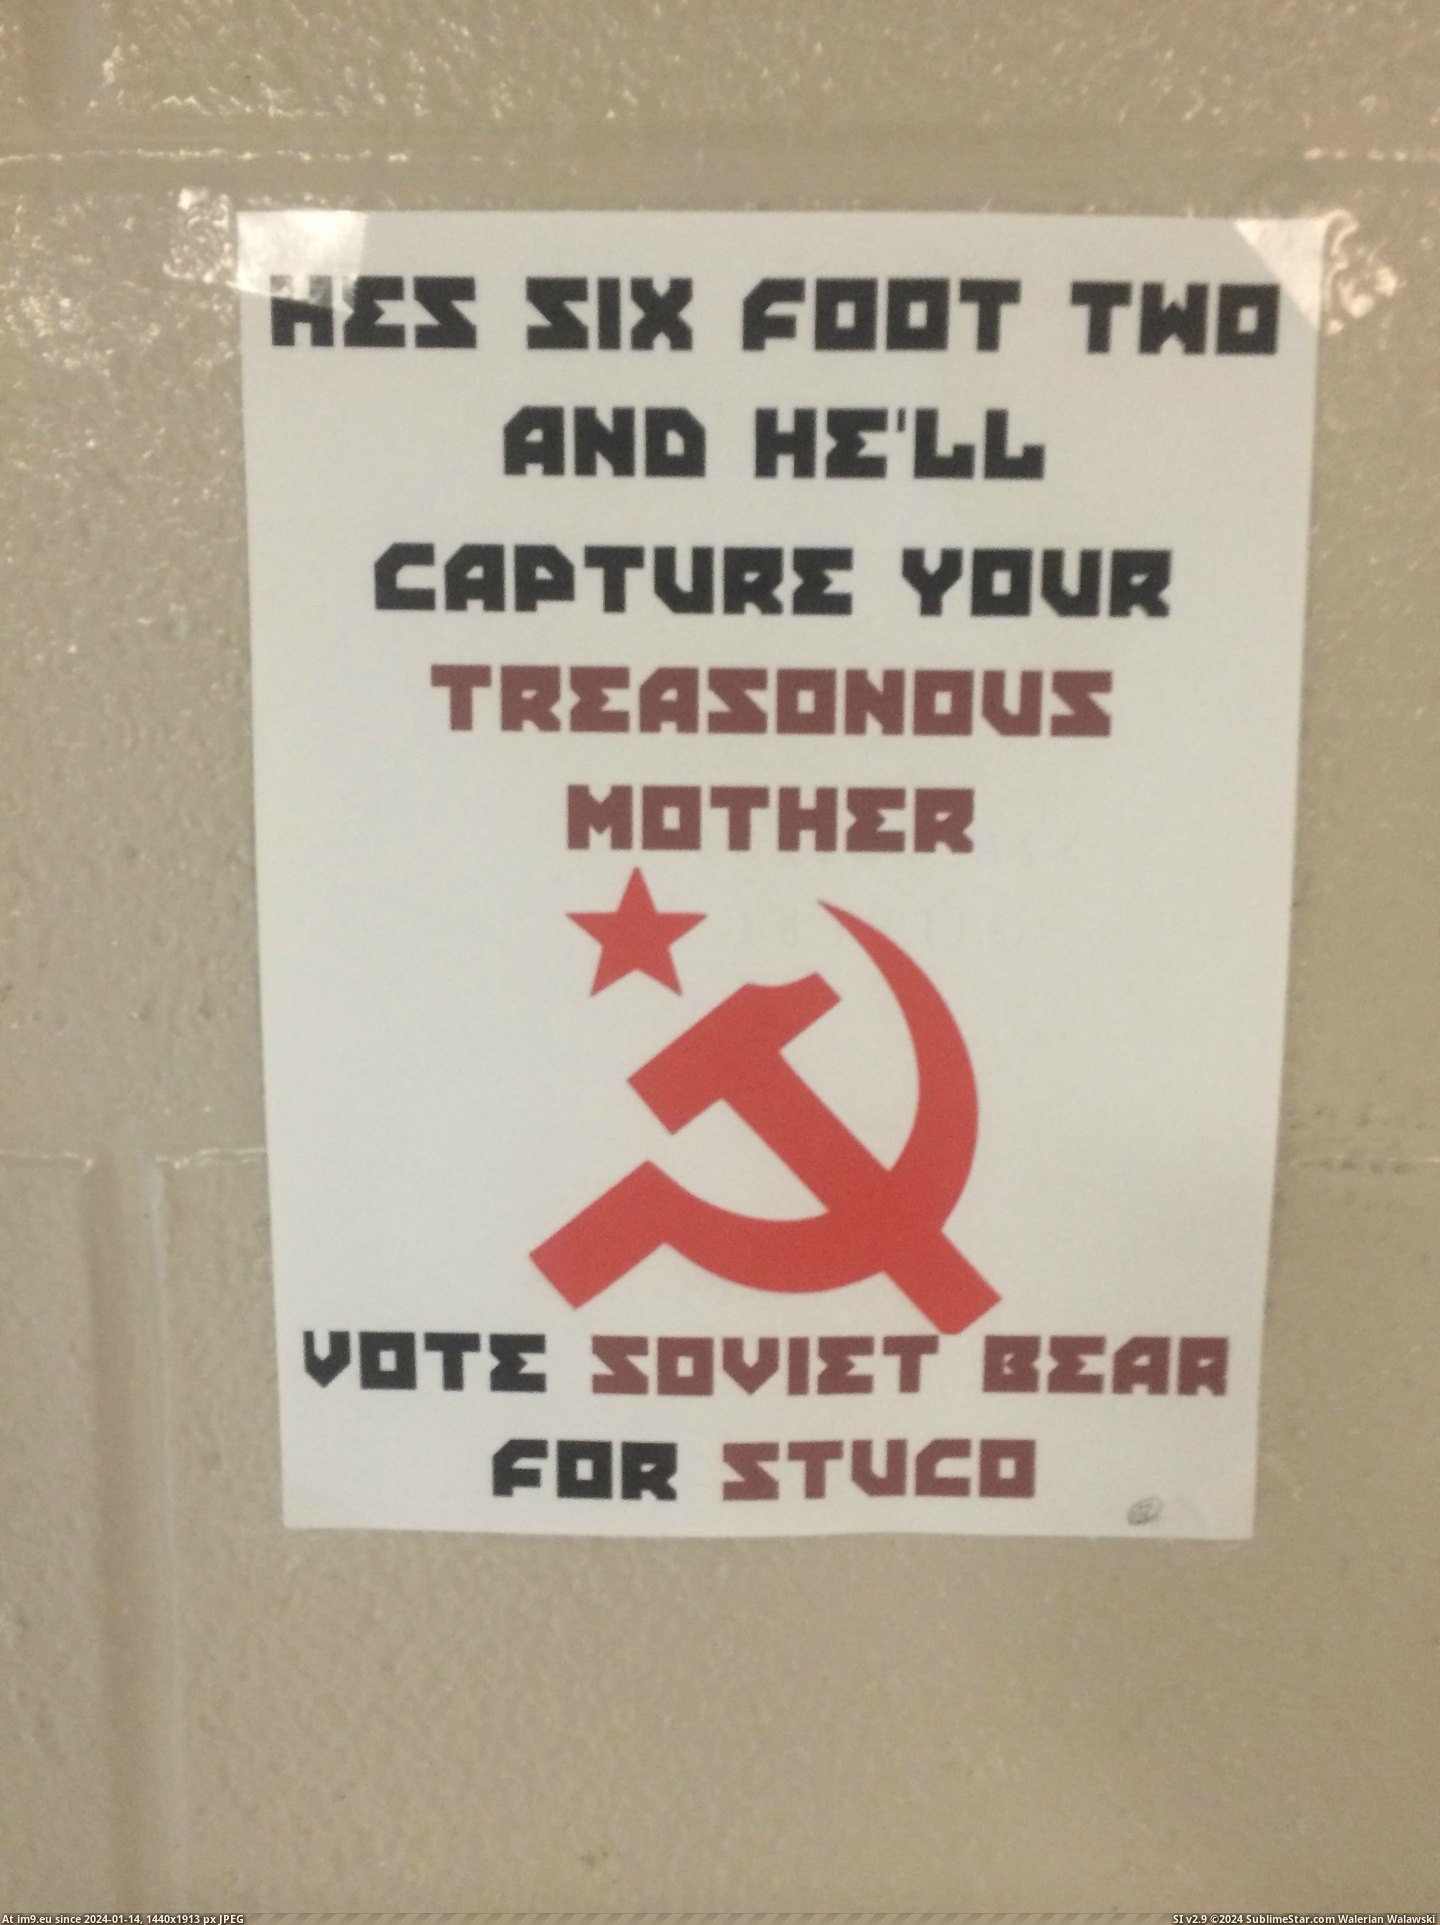 #Funny #School #Decided #Holding #Soviet #Council #Elections #Bear #Student #Run [Funny] So my school is holding elections for student council... and someone has decided to run as Soviet Bear 7 Pic. (Bild von album My r/FUNNY favs))